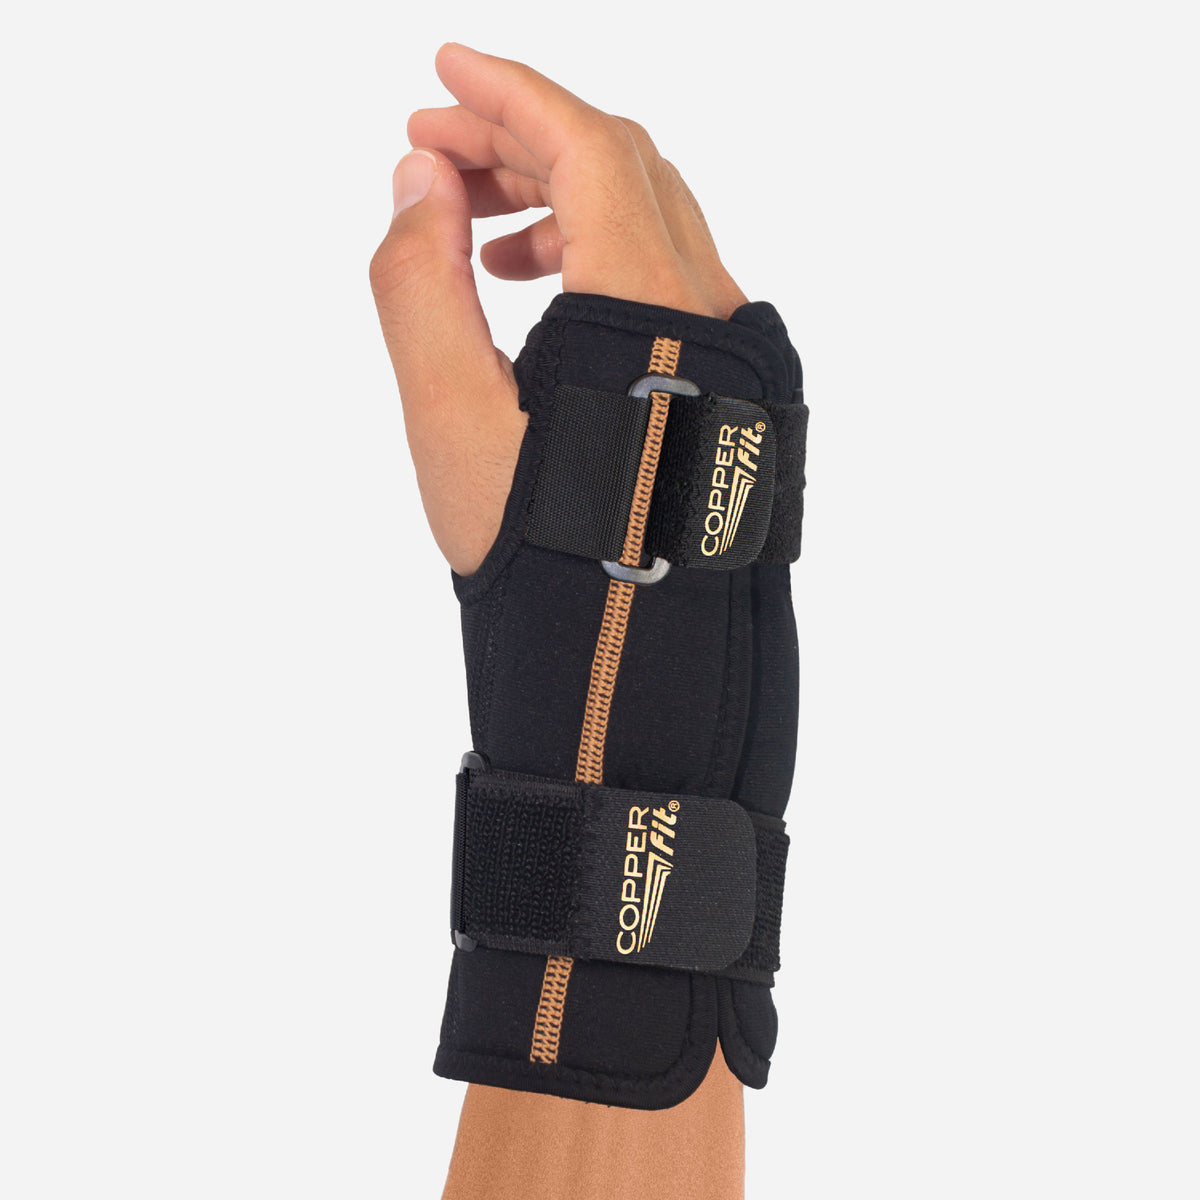 Copper Fit Men's Rapid Relief Back Support Brace With Hot/cold Therapy